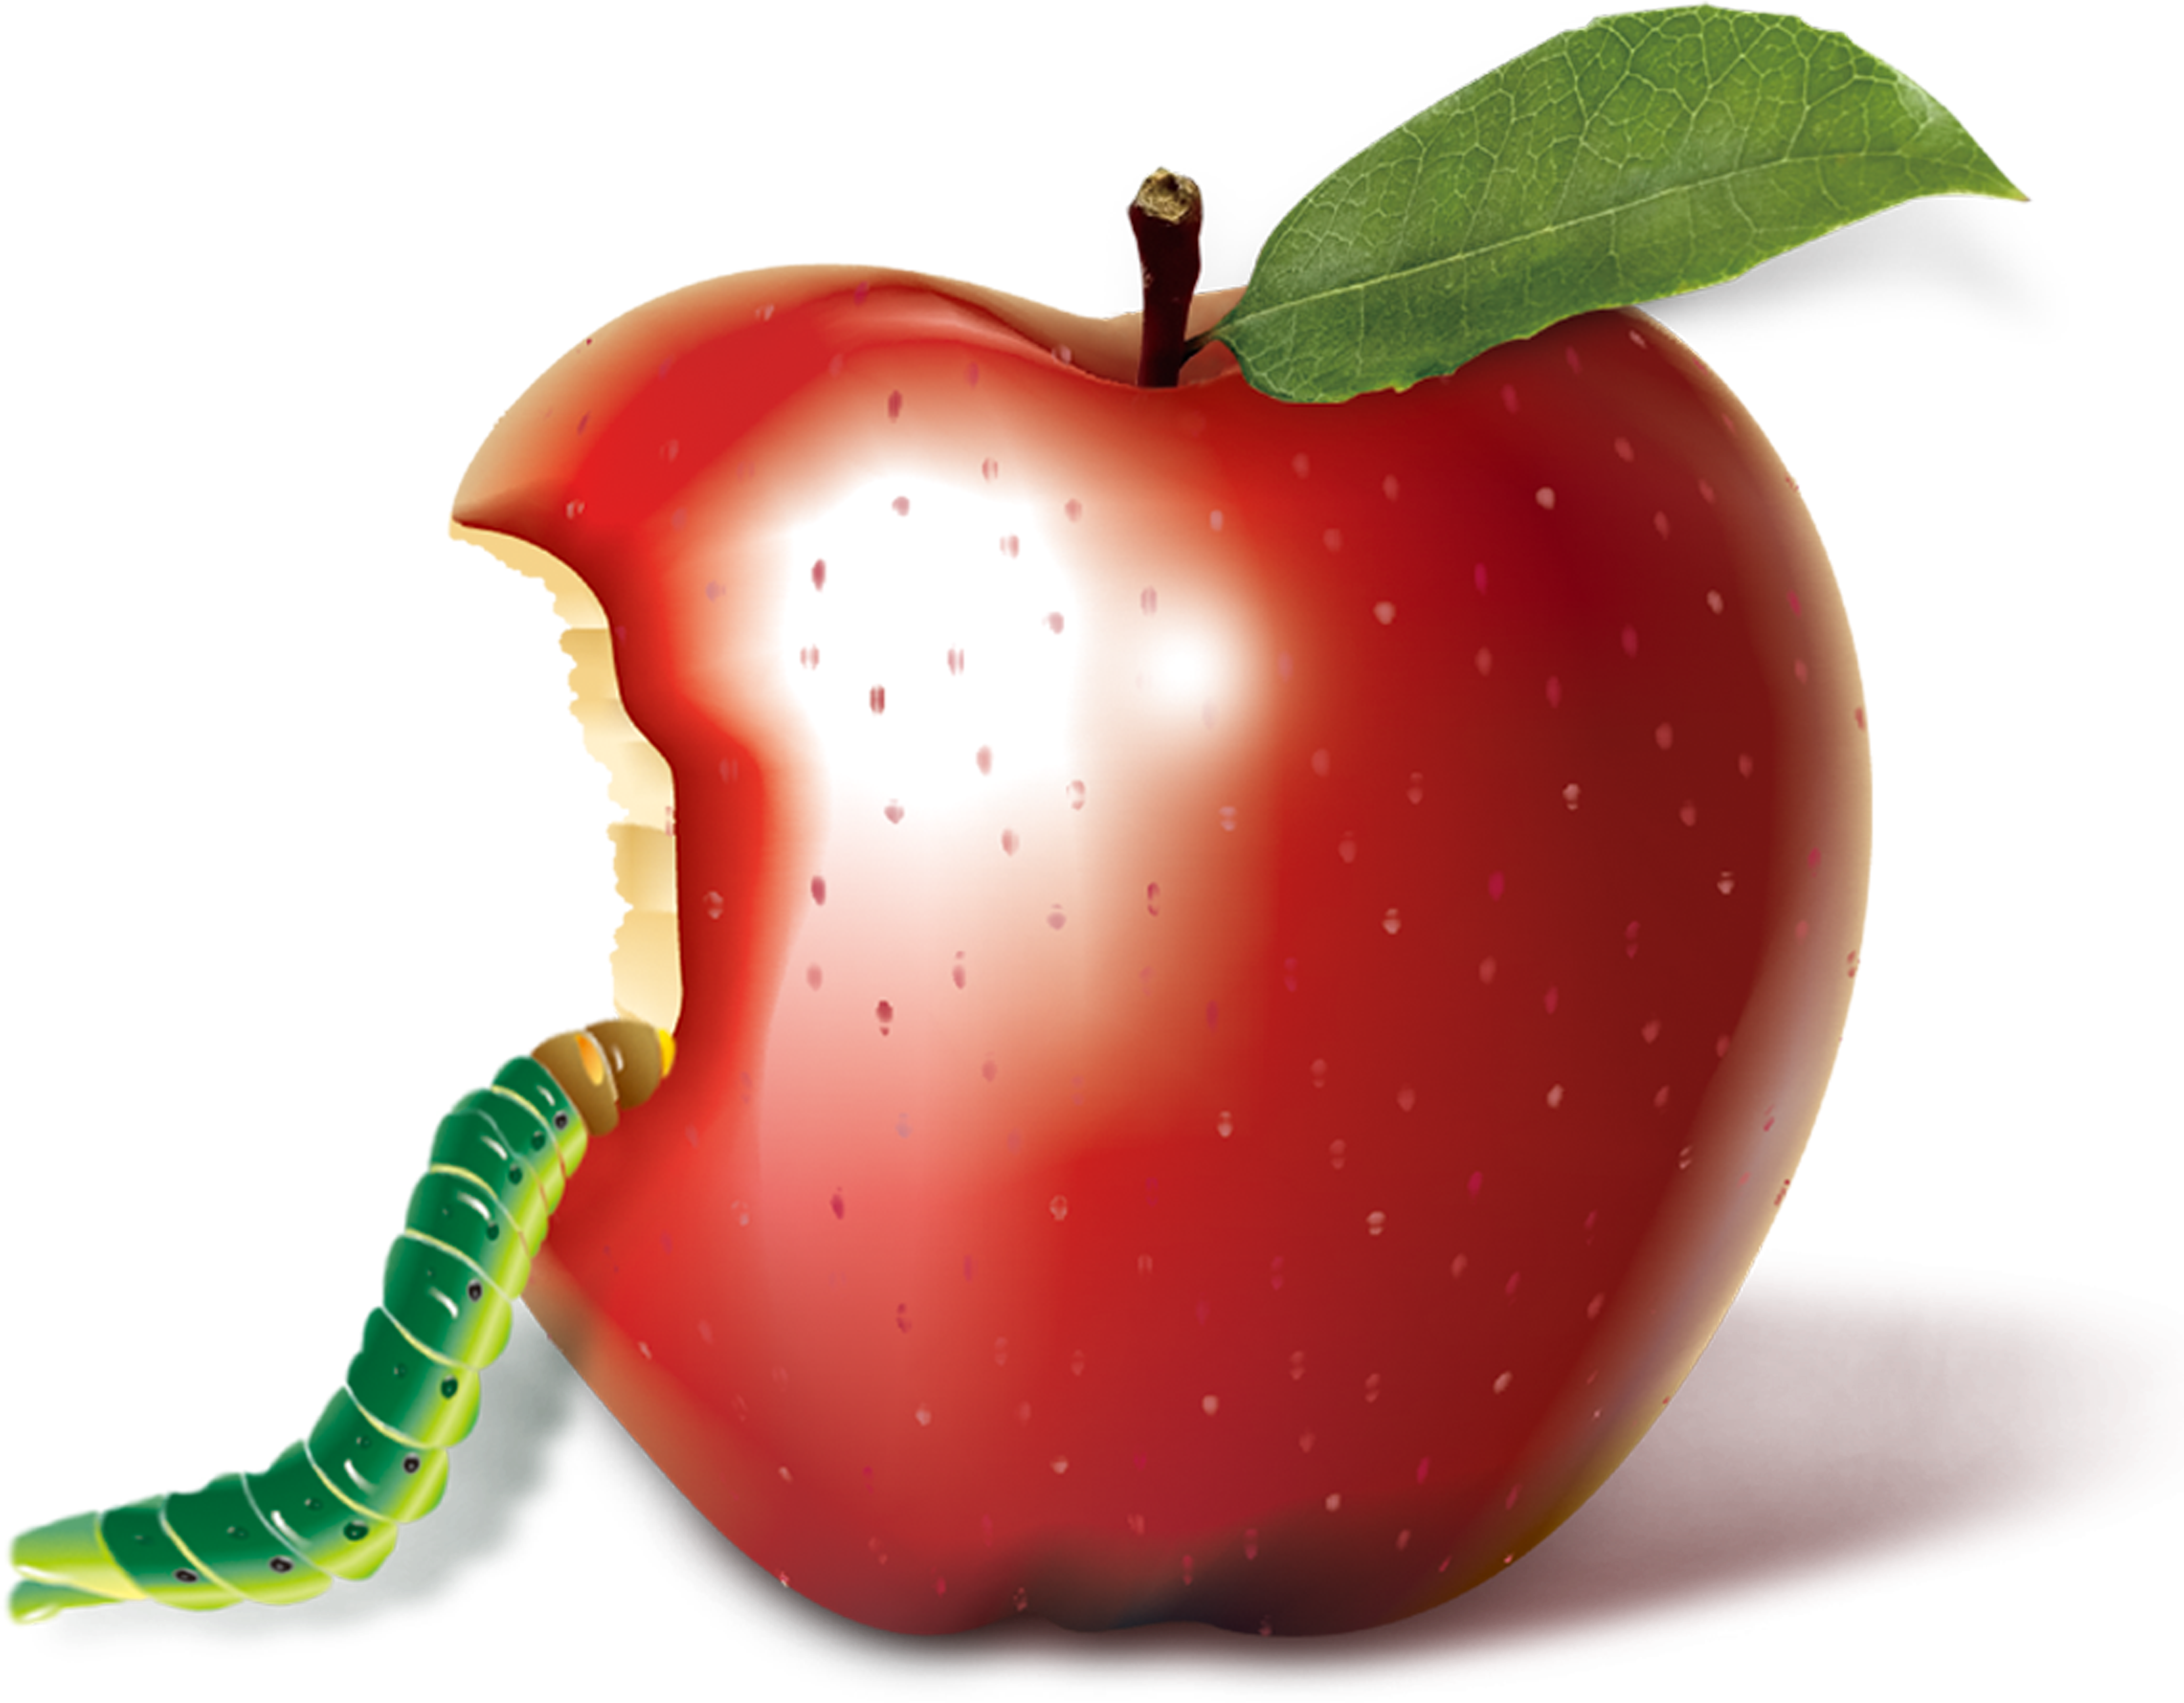 Apple On The Caterpillar 5159*6183 Transprent Png Free - Apple On The Caterpillar 5159*6183 Transprent Png Free (5159x6183)